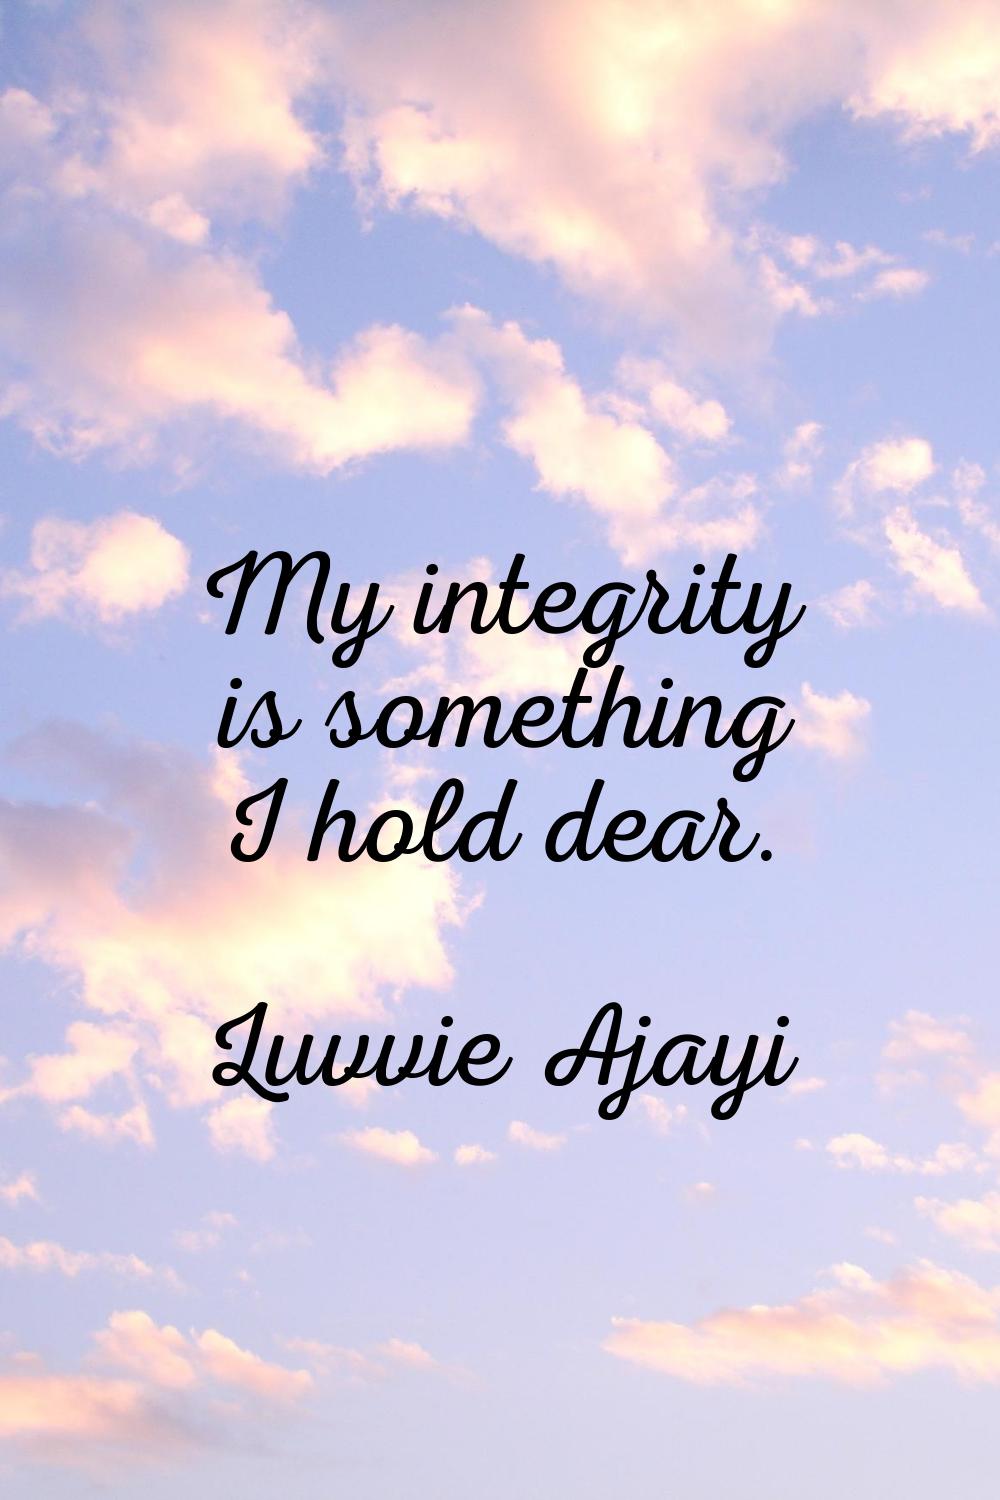 My integrity is something I hold dear.